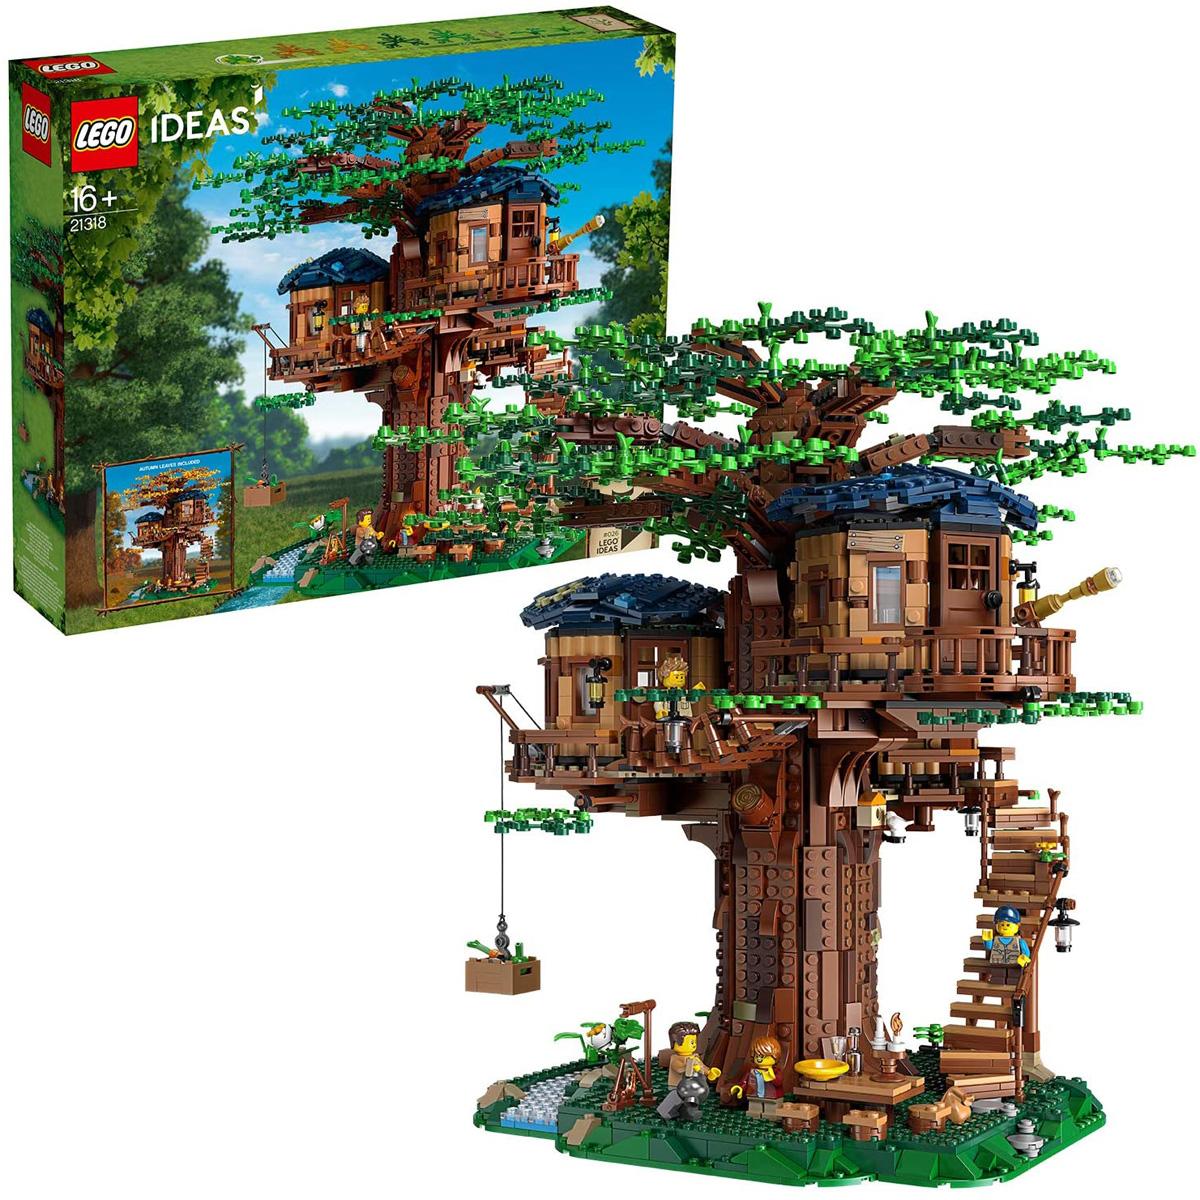 Lego Ideas 3036-Piece 21318 Tree House for $189.99 Shipped